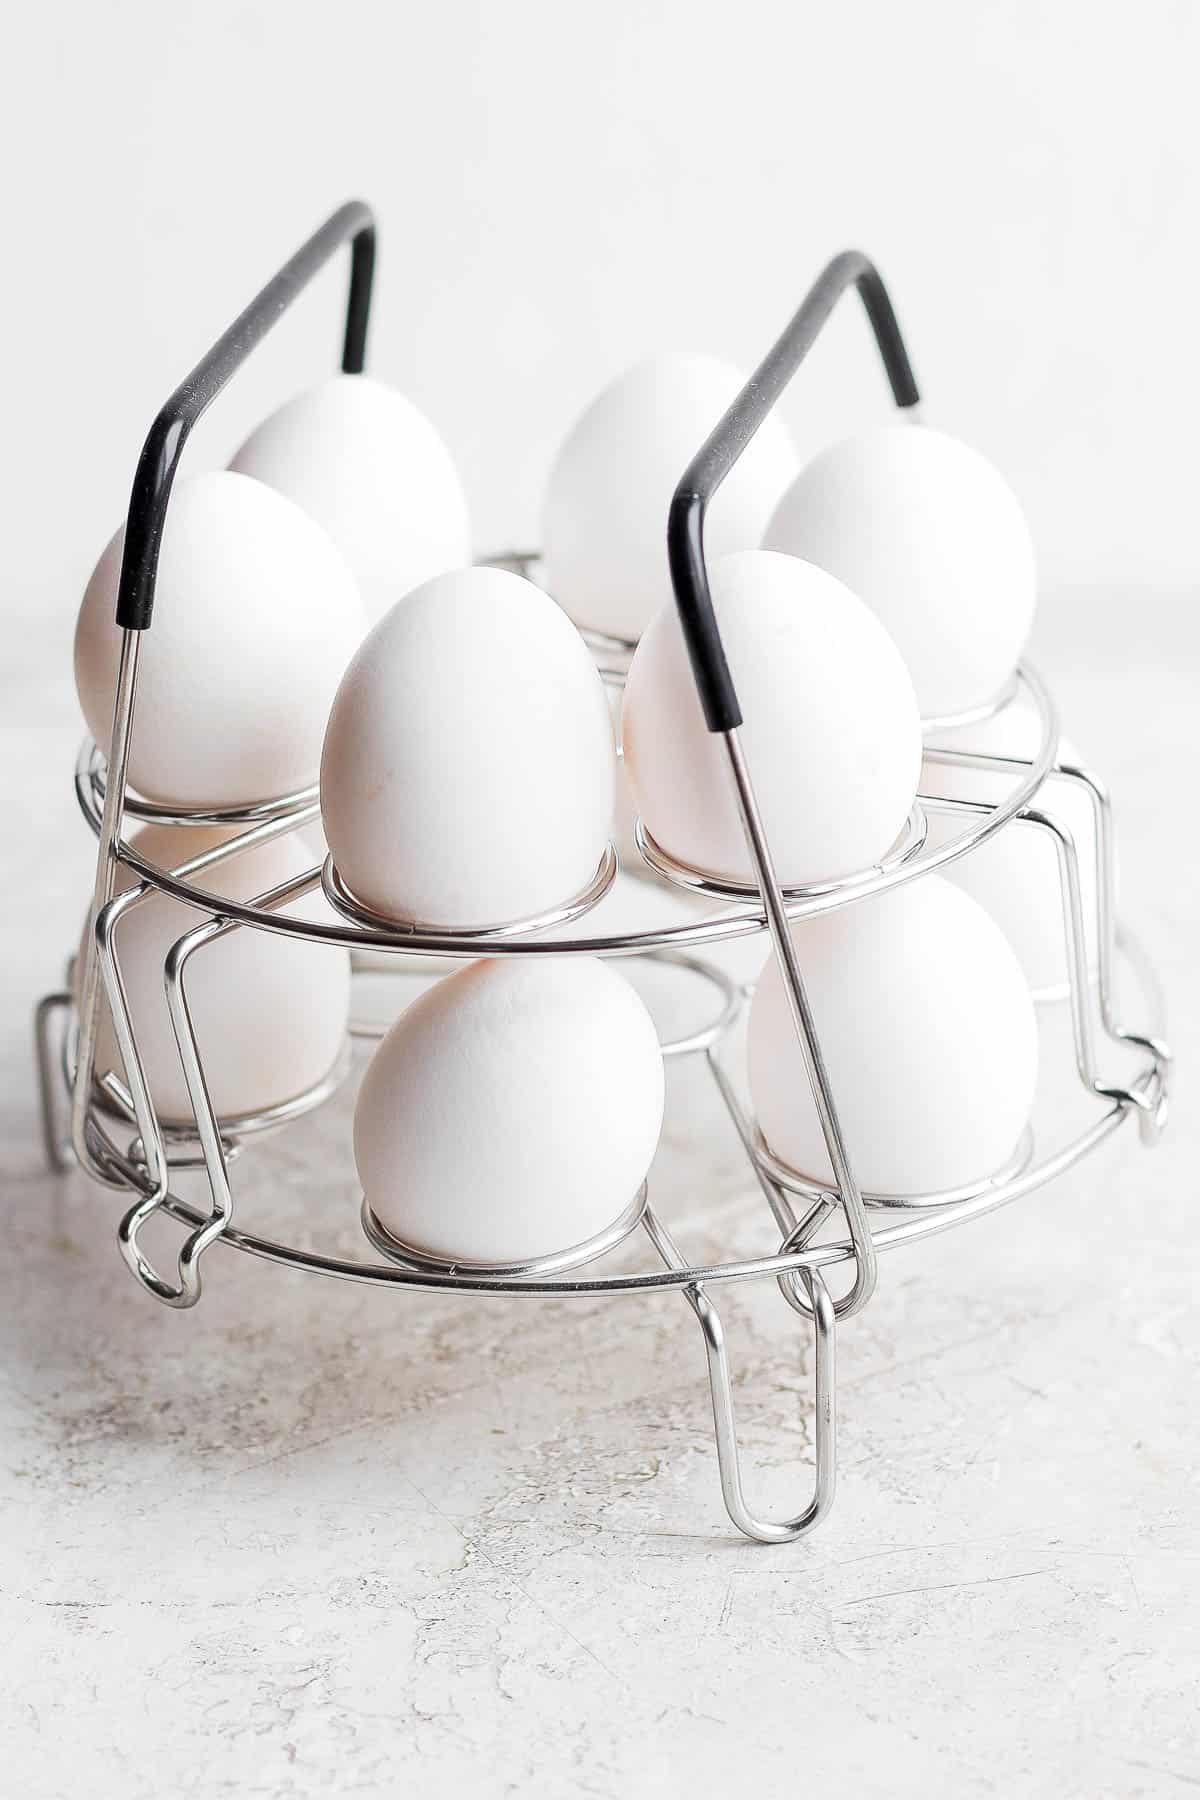 An instant pot egg rack filled with 12 eggs on a counter top.